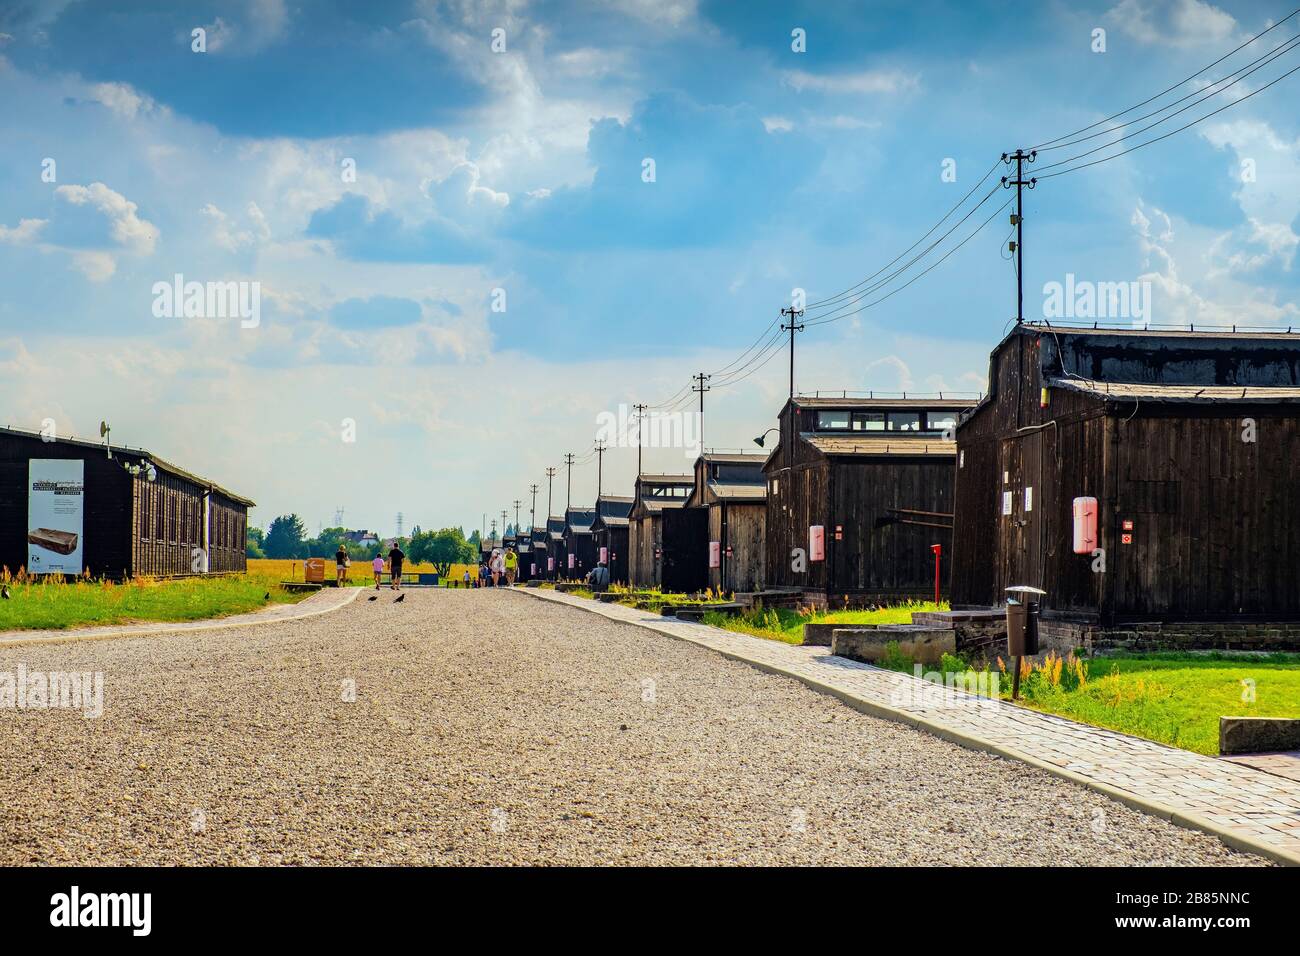 Lublin, Lubelskie / Poland - 2019/08/17: Barracks and fences of the Majdanek KL Lublin Nazis concentration camp - Konzentrationslager Lublin Stock Photo